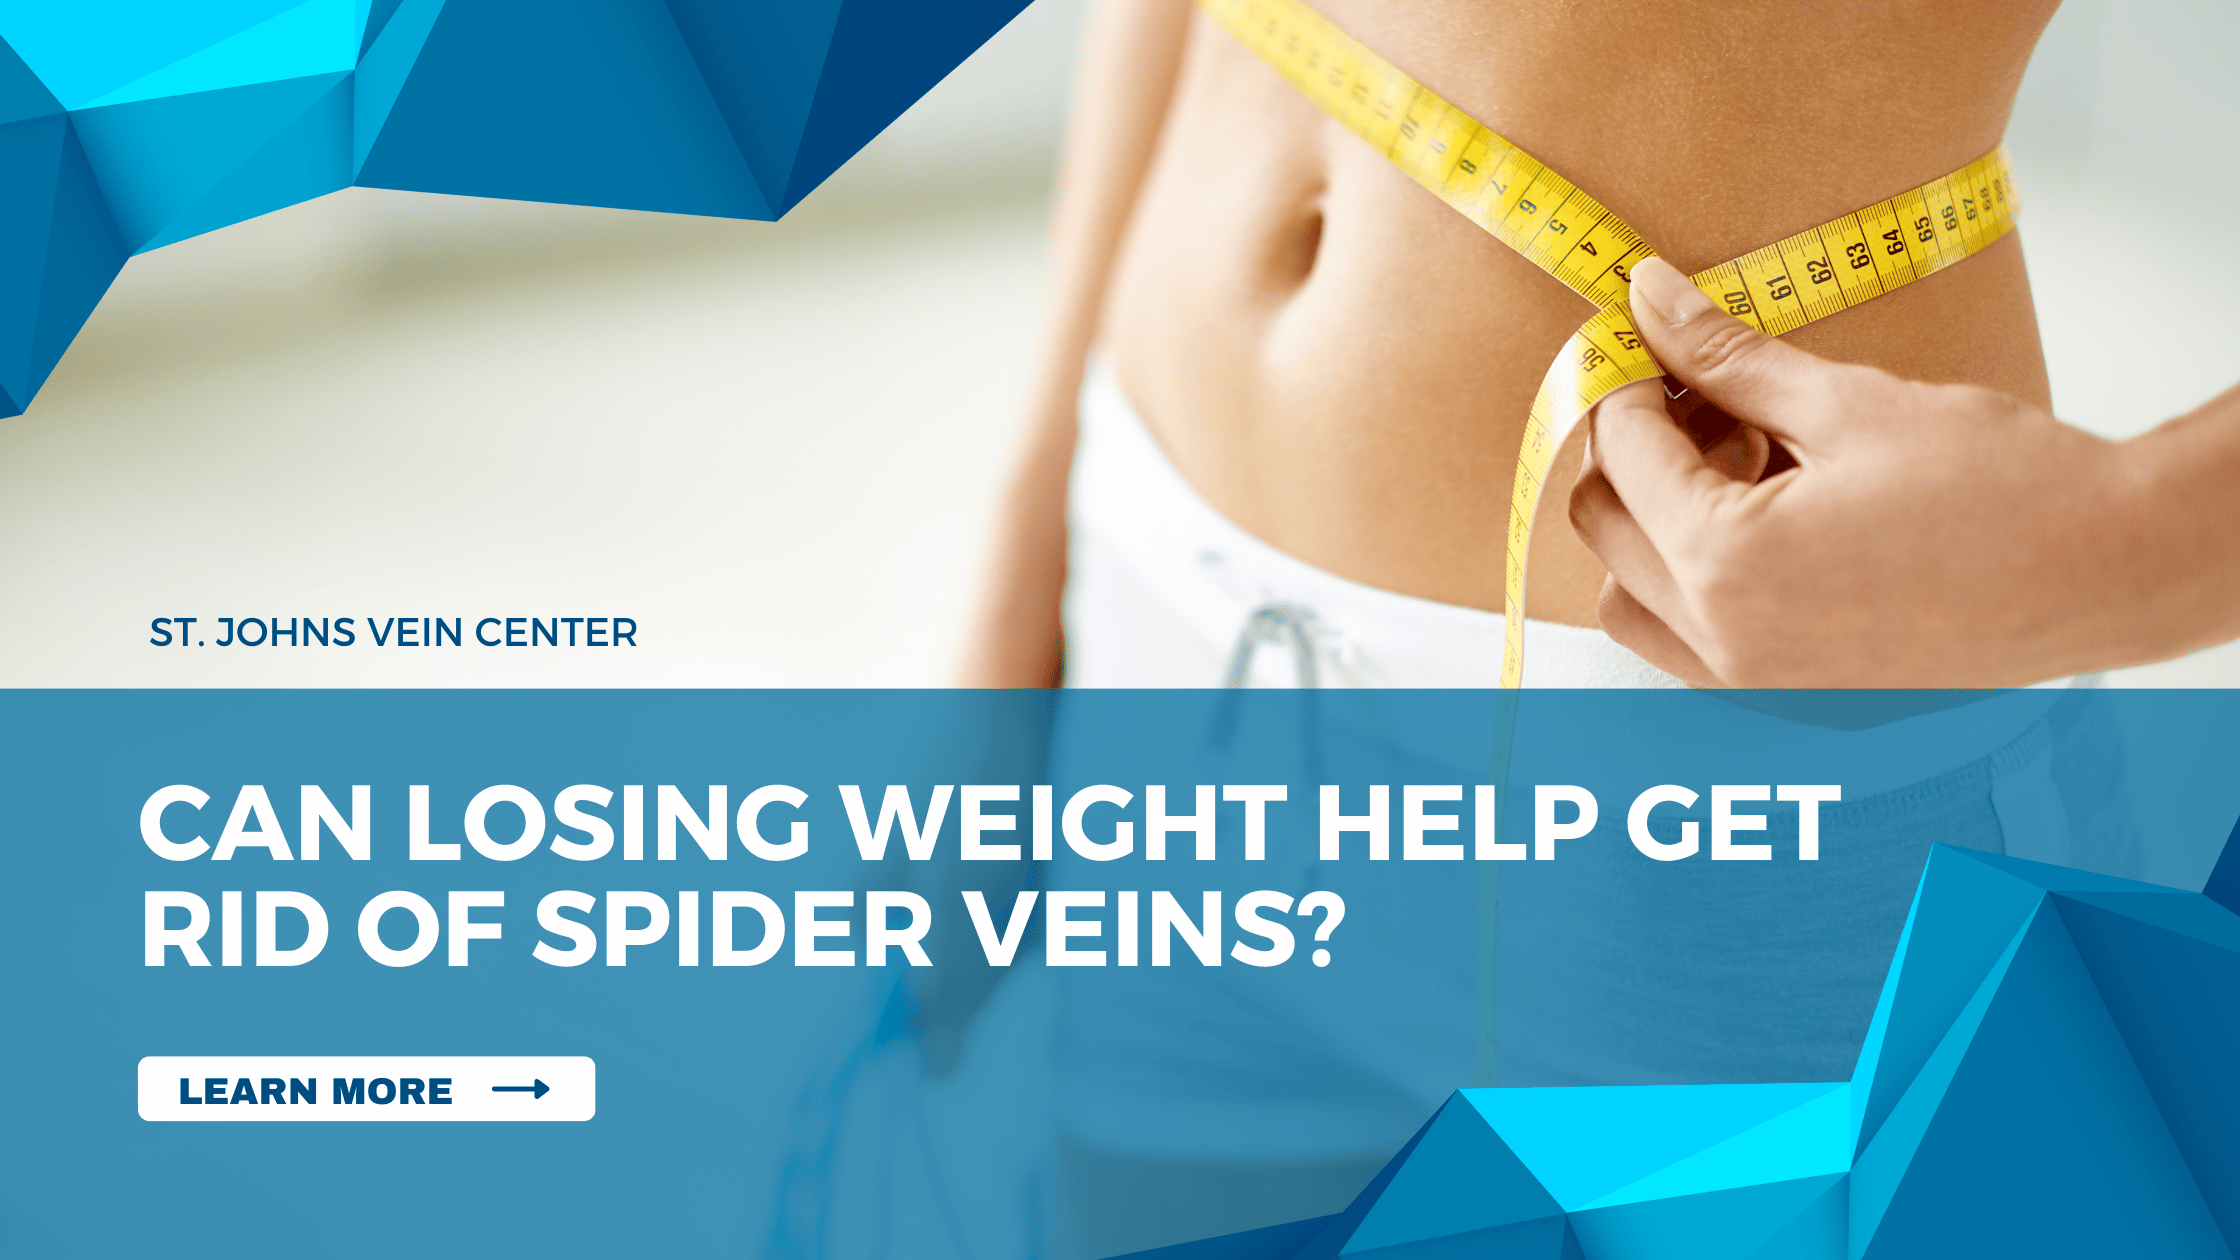 Can Losing Weight Help Get Rid of Spider Veins